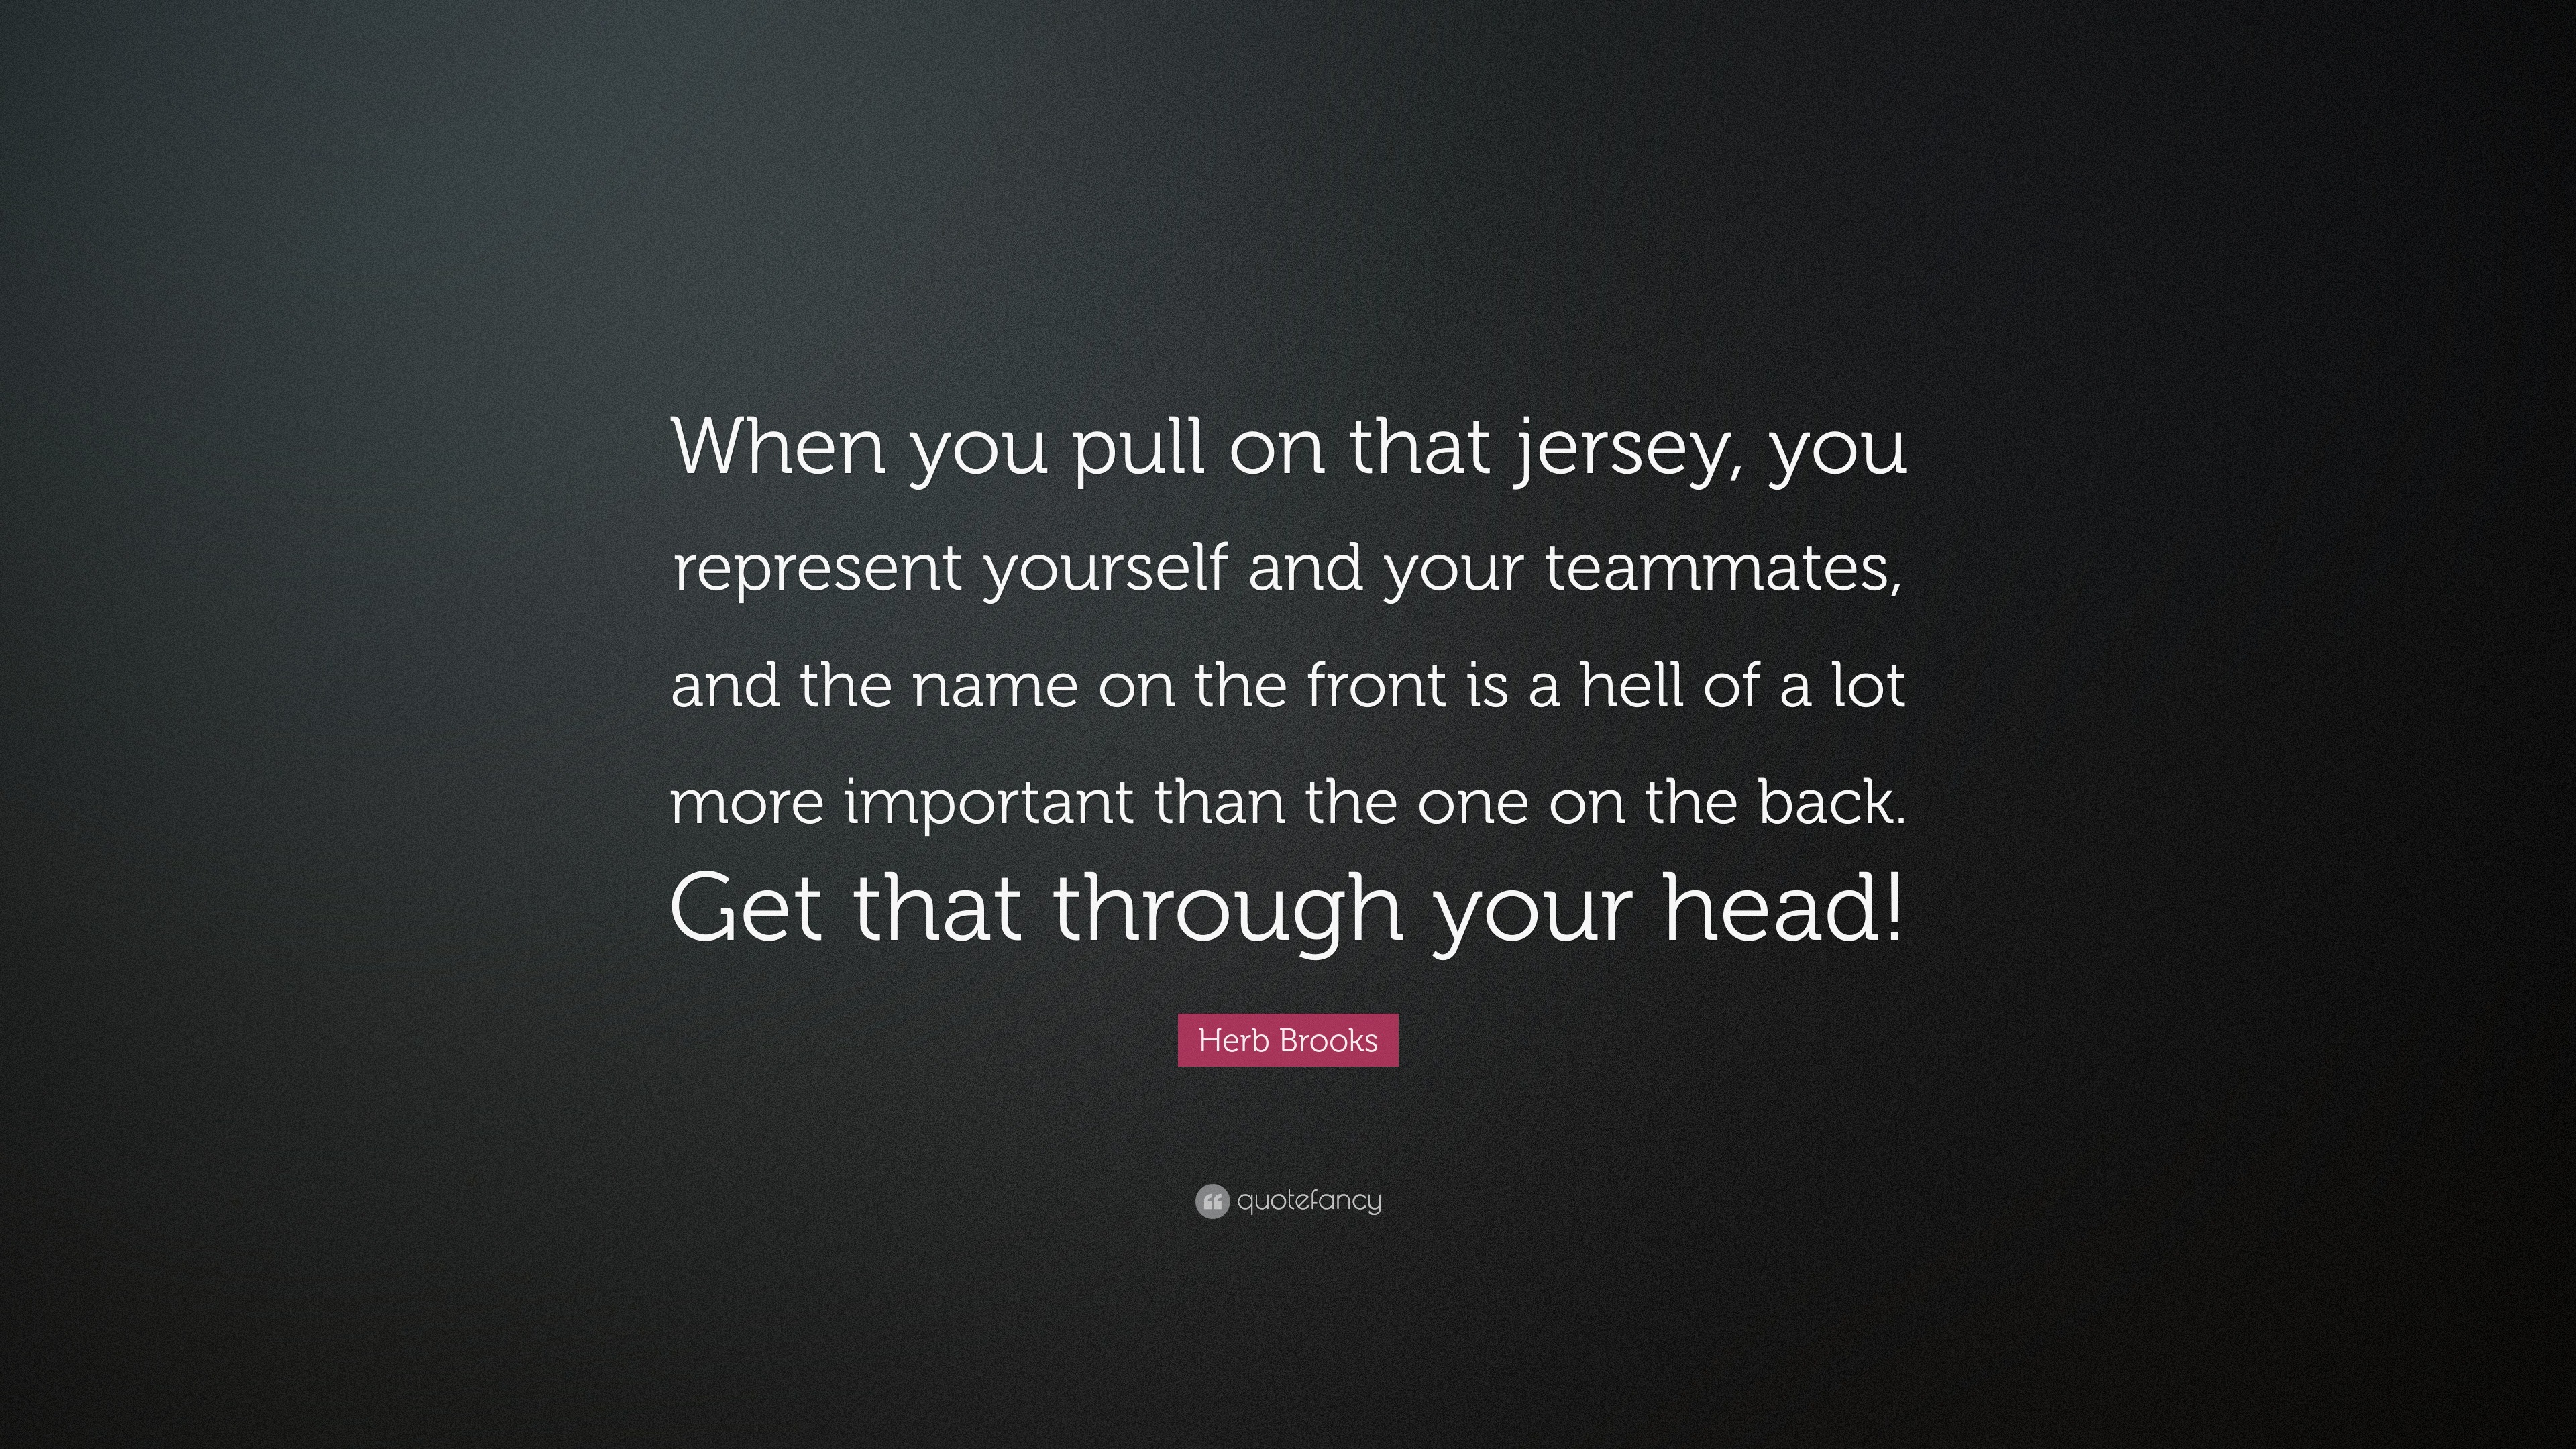 herb brooks quotes the name on the front